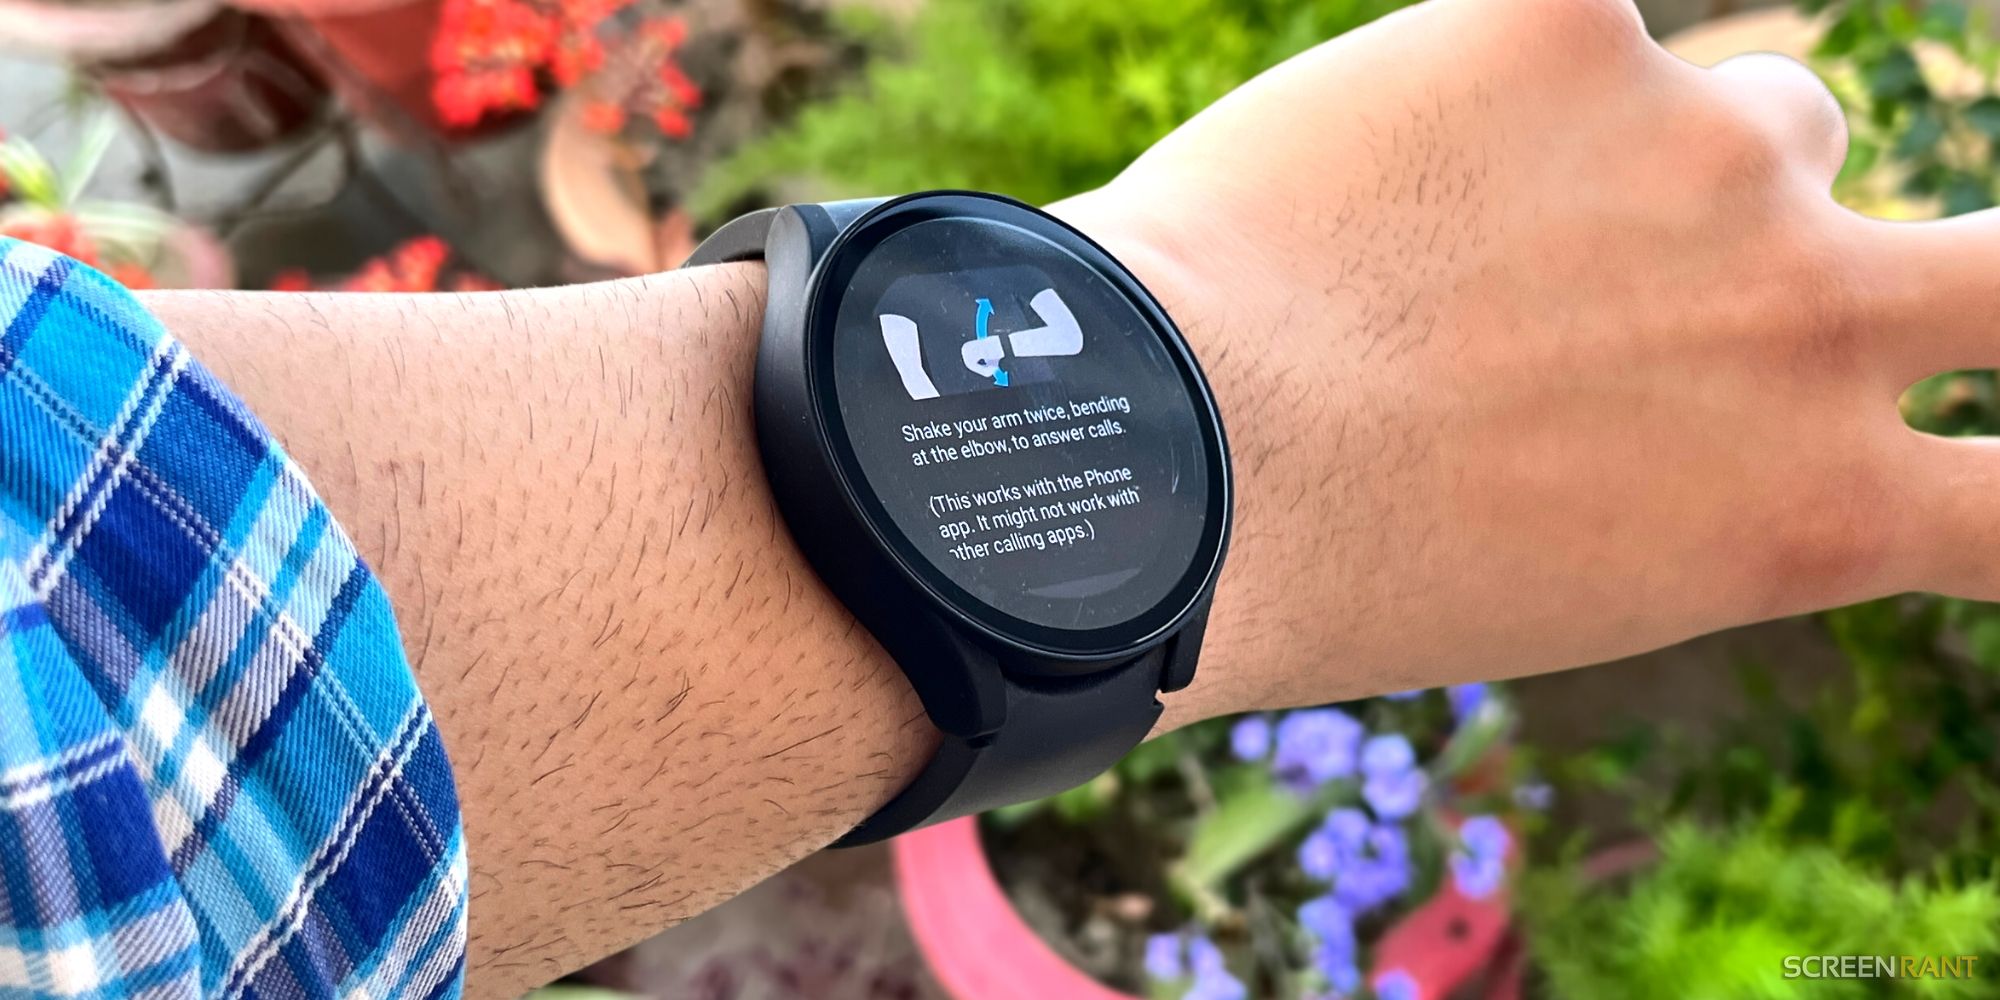 Image of the Galaxy Watch 5's gesture control feature